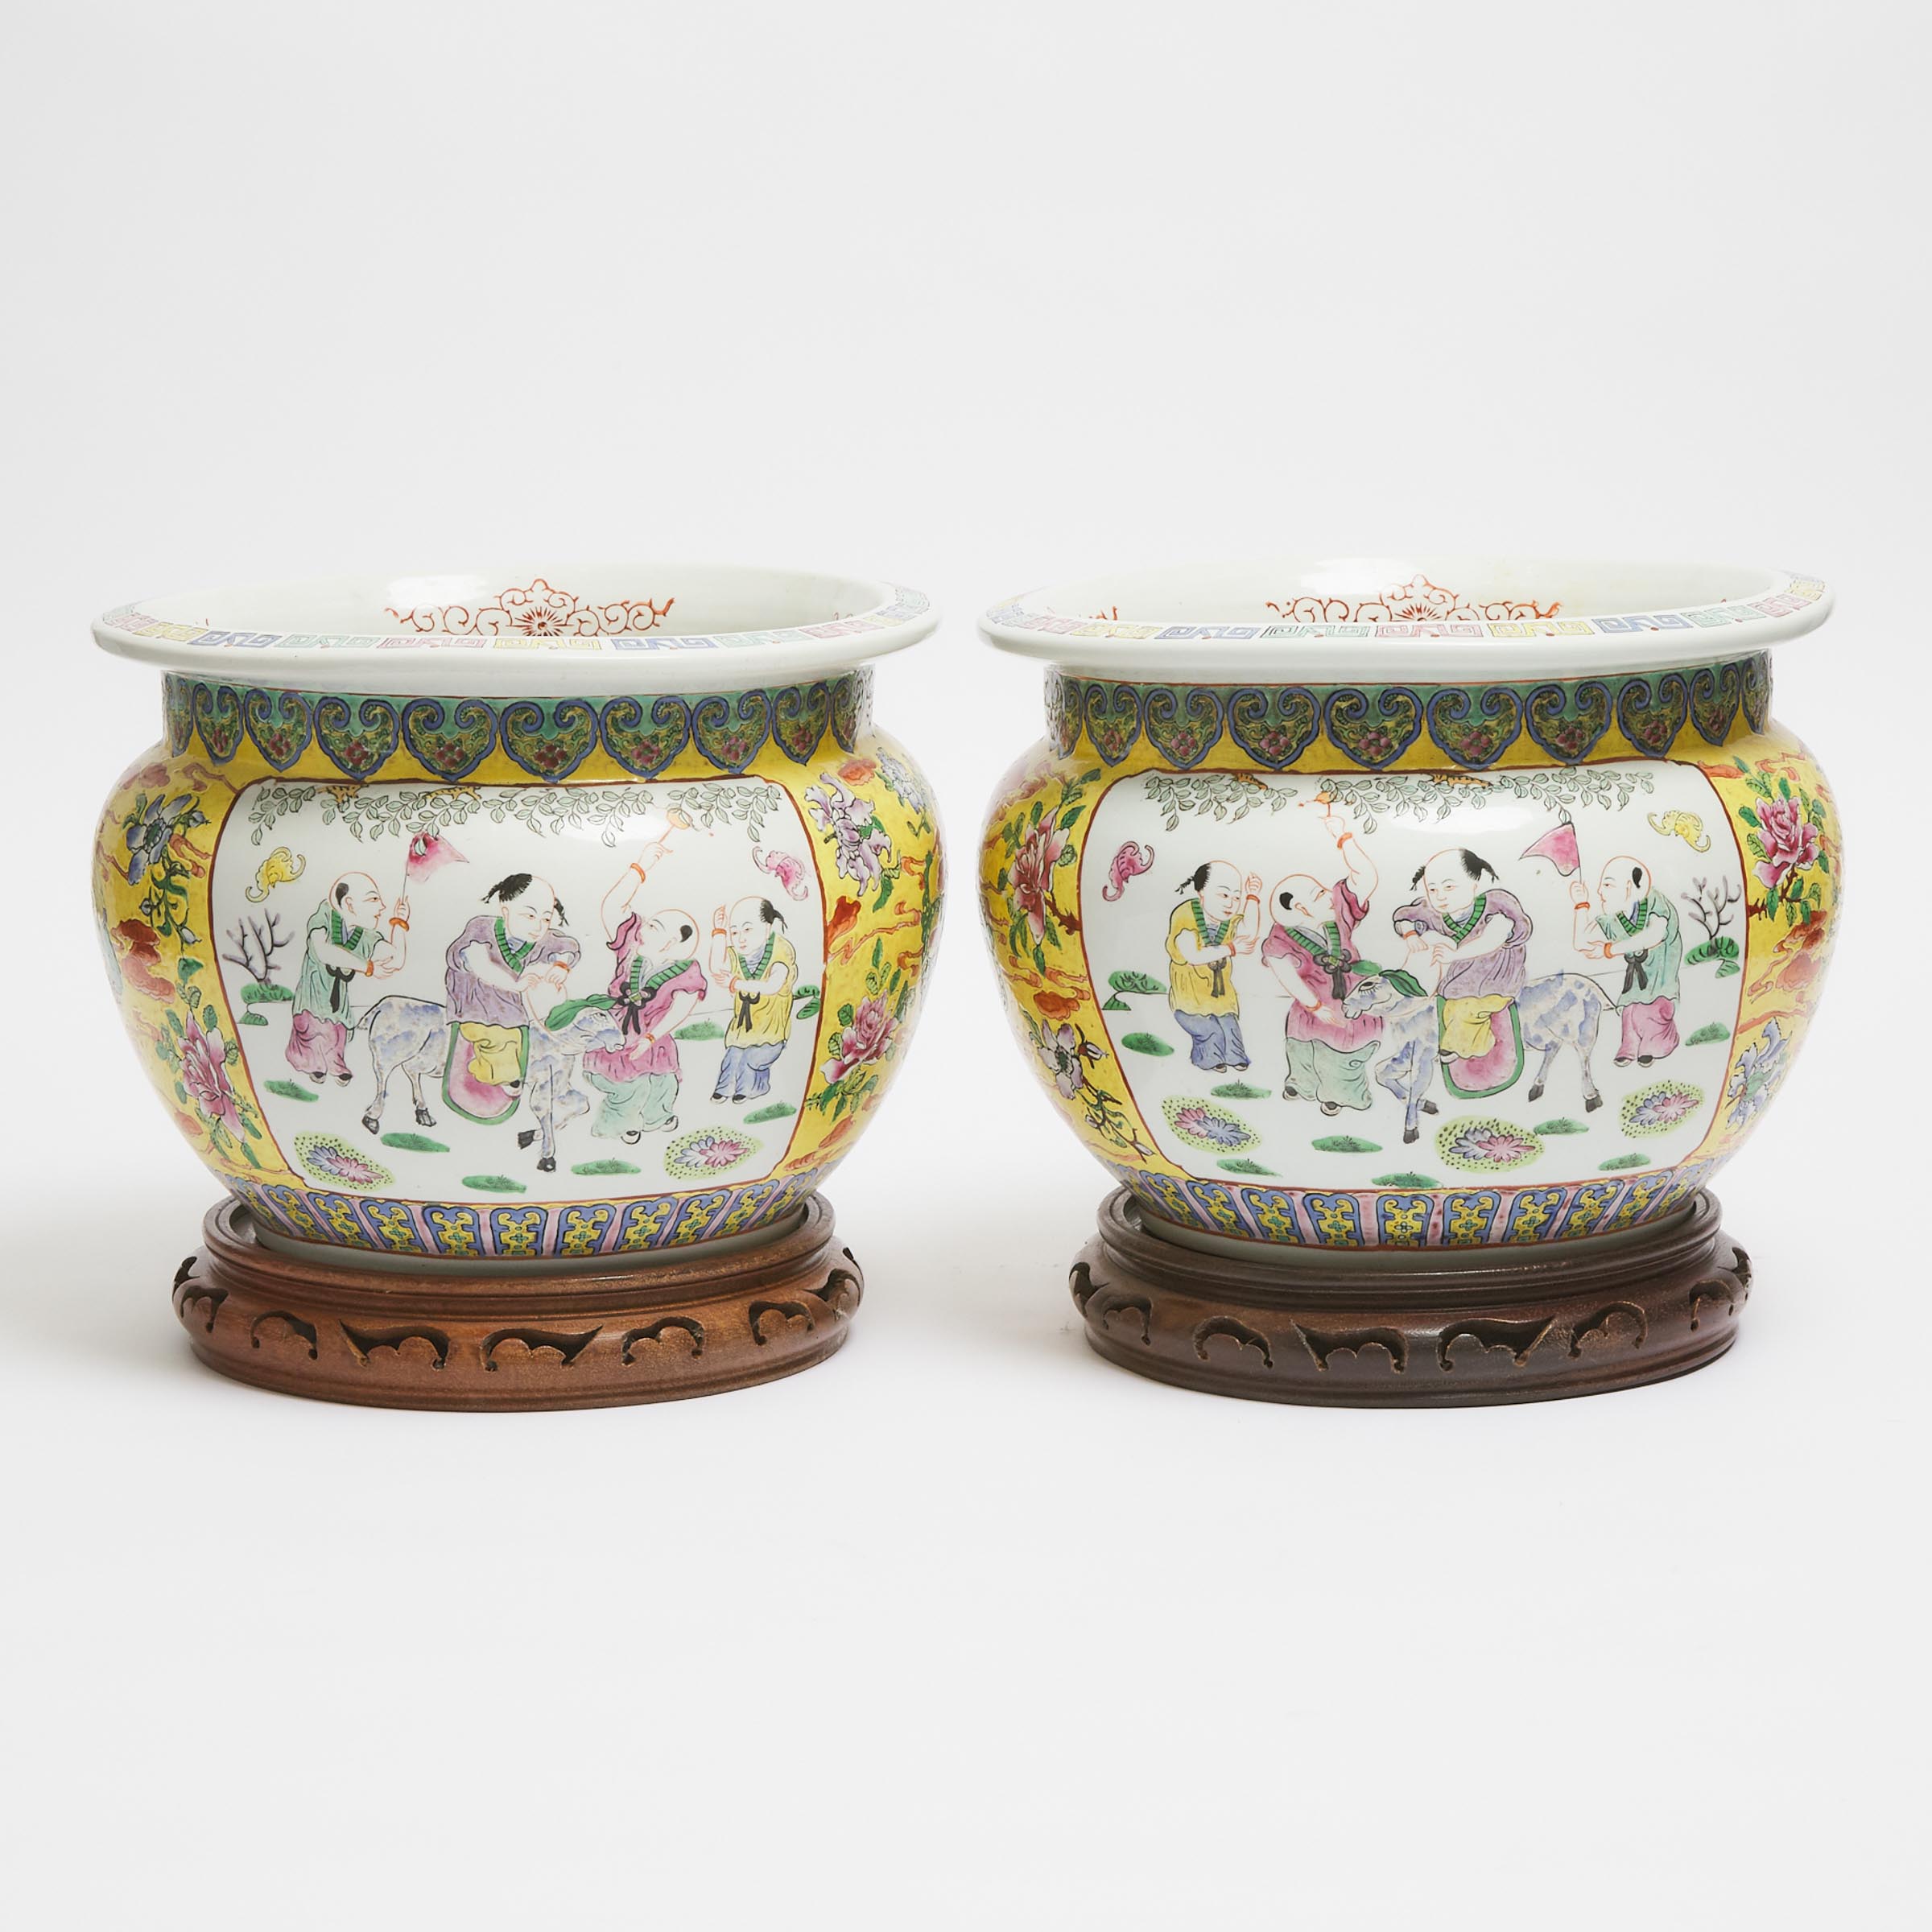 A Pair of Yellow-Ground Famille Rose Fish Bowls, Daoguang Mark, Early to Mid 20th Century